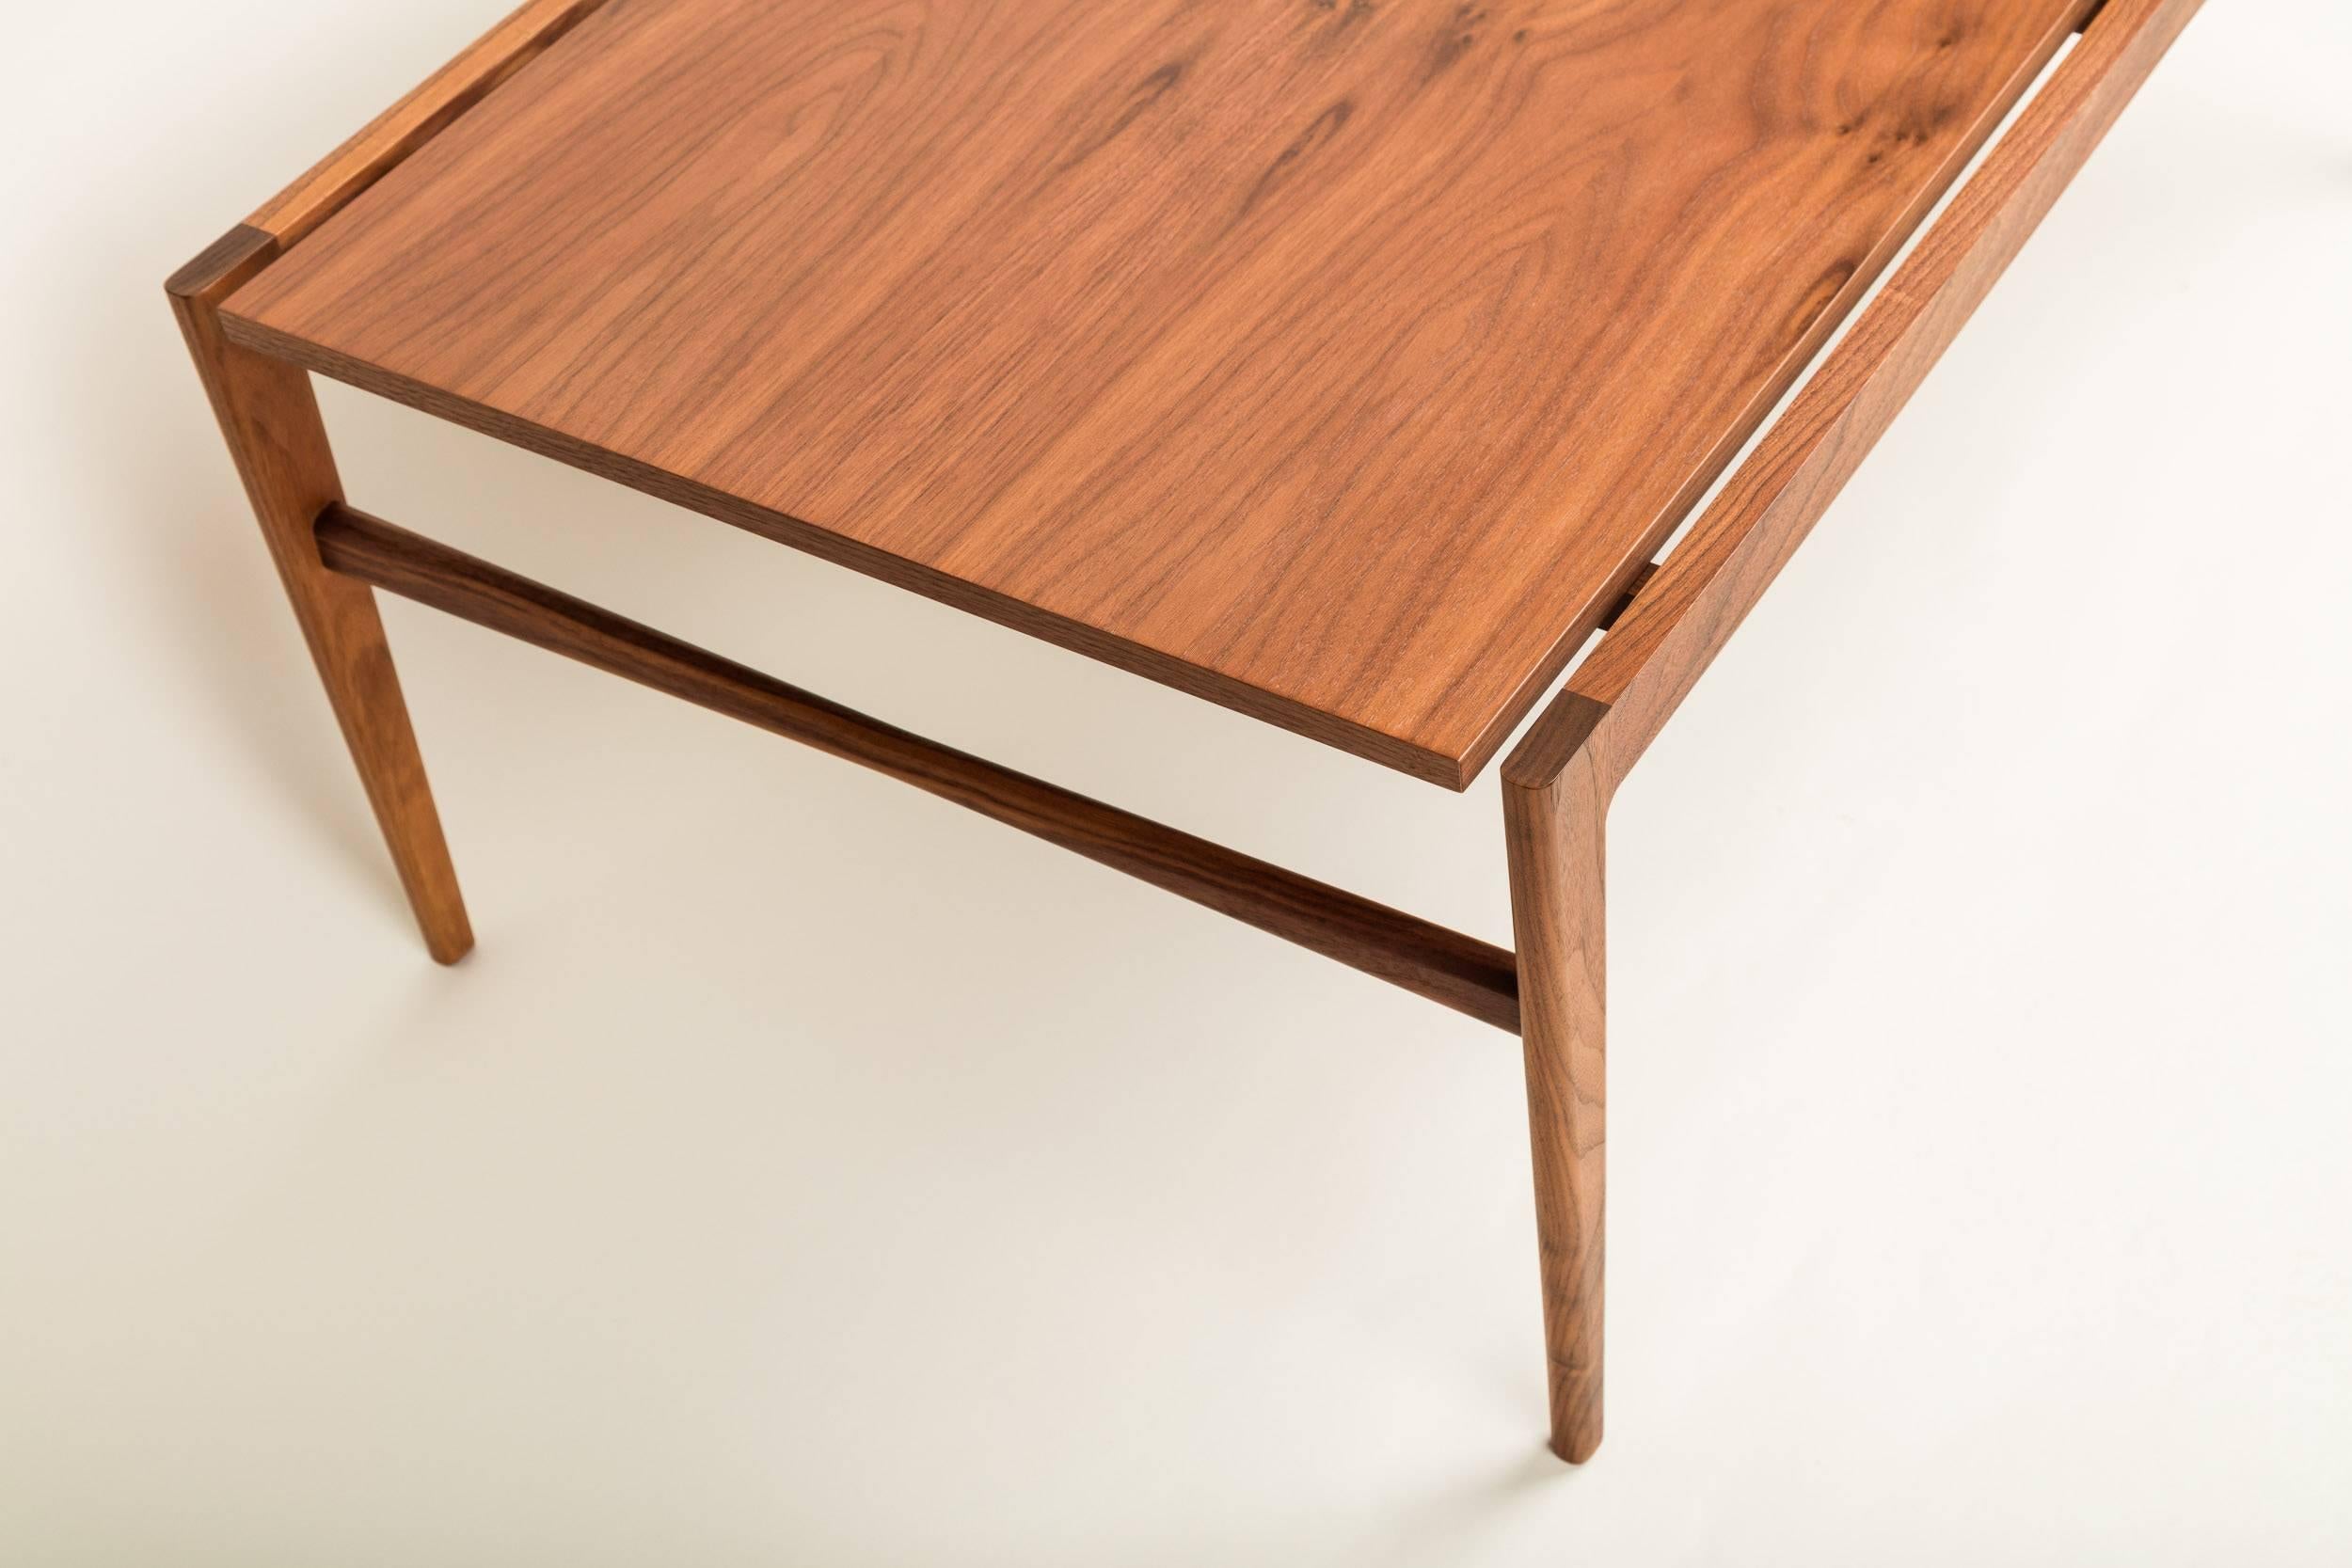 Lilian Coffee Table 1 by Matthew Ryan for MaxWood Co.

This handmade walnut table features a floating top with bookmatched gorgeous flat grain. Delicate features are mixed with sharp subtle lines and angles, inspired by the elegance of black widow